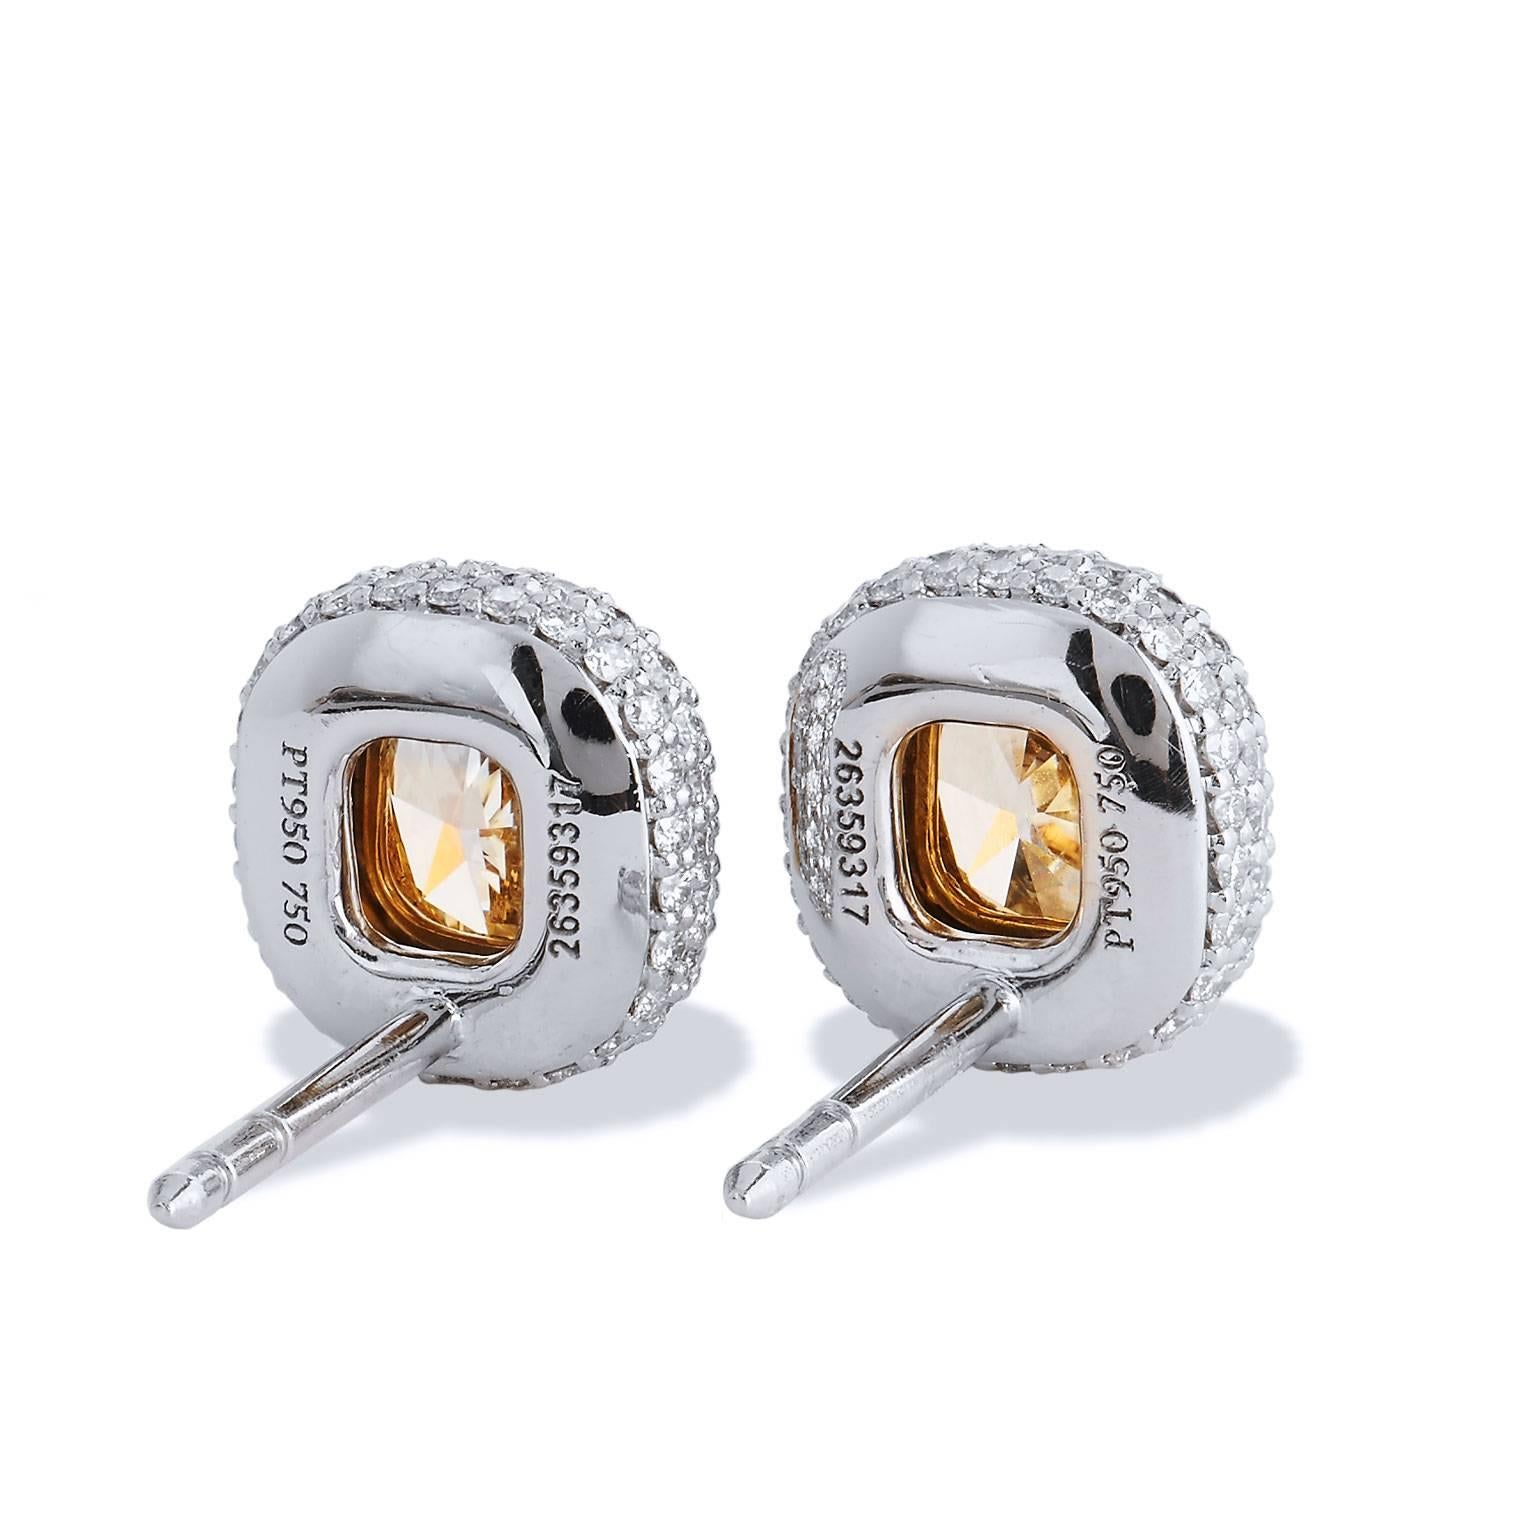 Enjoy these previously loved Tiffany & Co platinum and 18 karat yellow gold stud earrings featuring two fancy yellow diamonds set at center with a total weight of 1.68  carat (IF/VS1). To further enhance the glowing fancy yellow cushion cut diamond